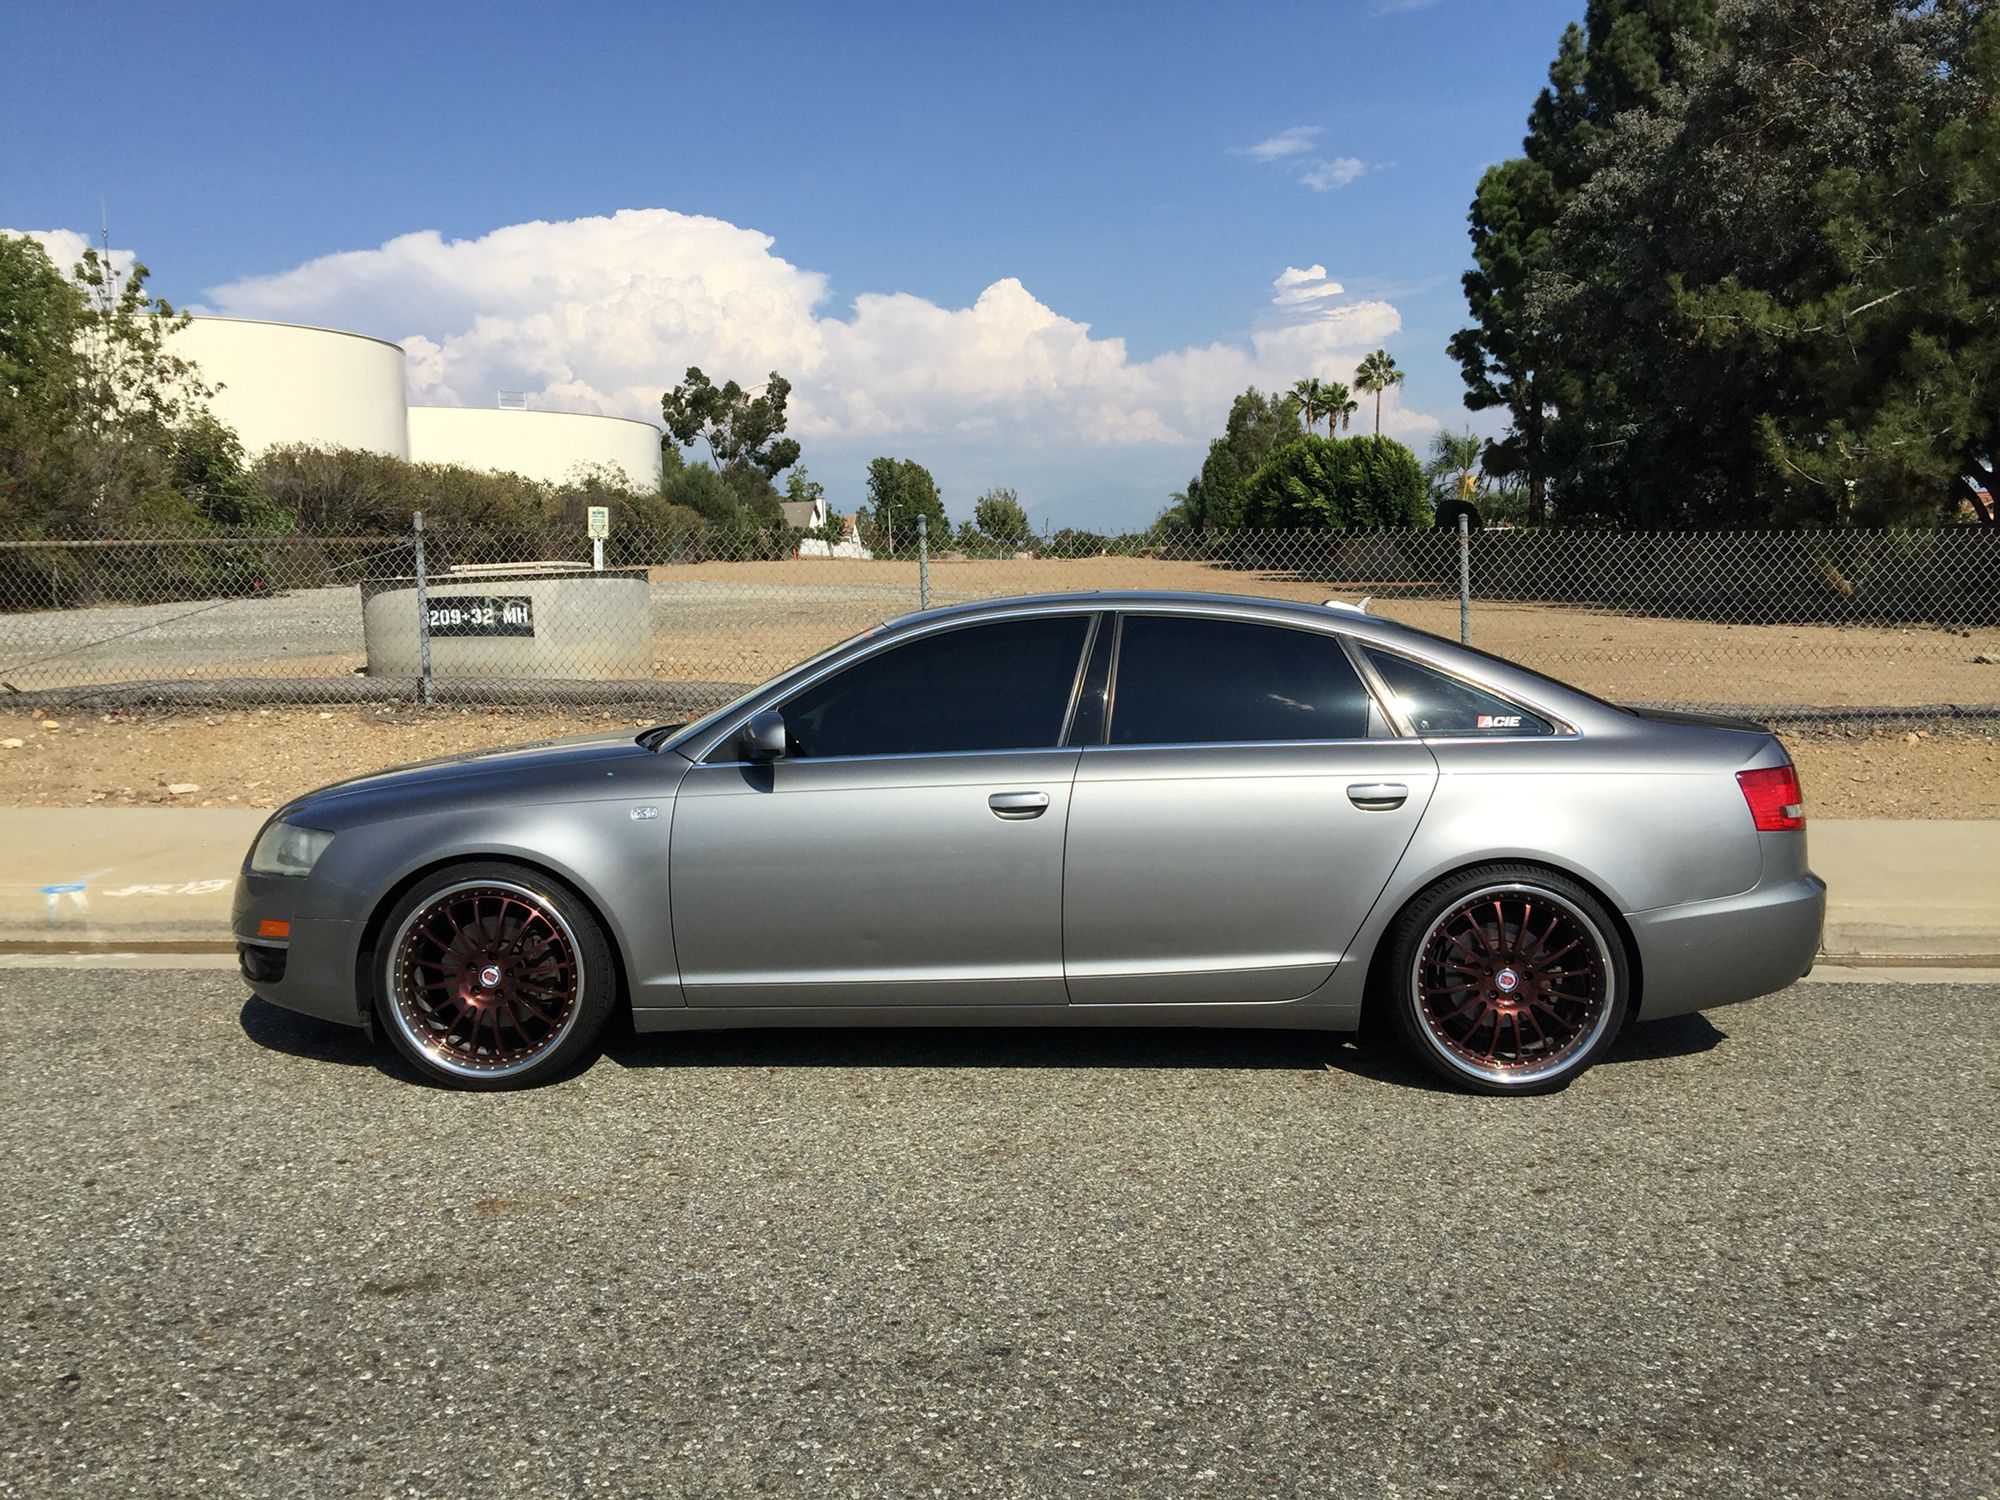 2006 Audi A6 C6 with a set of Hre 549r